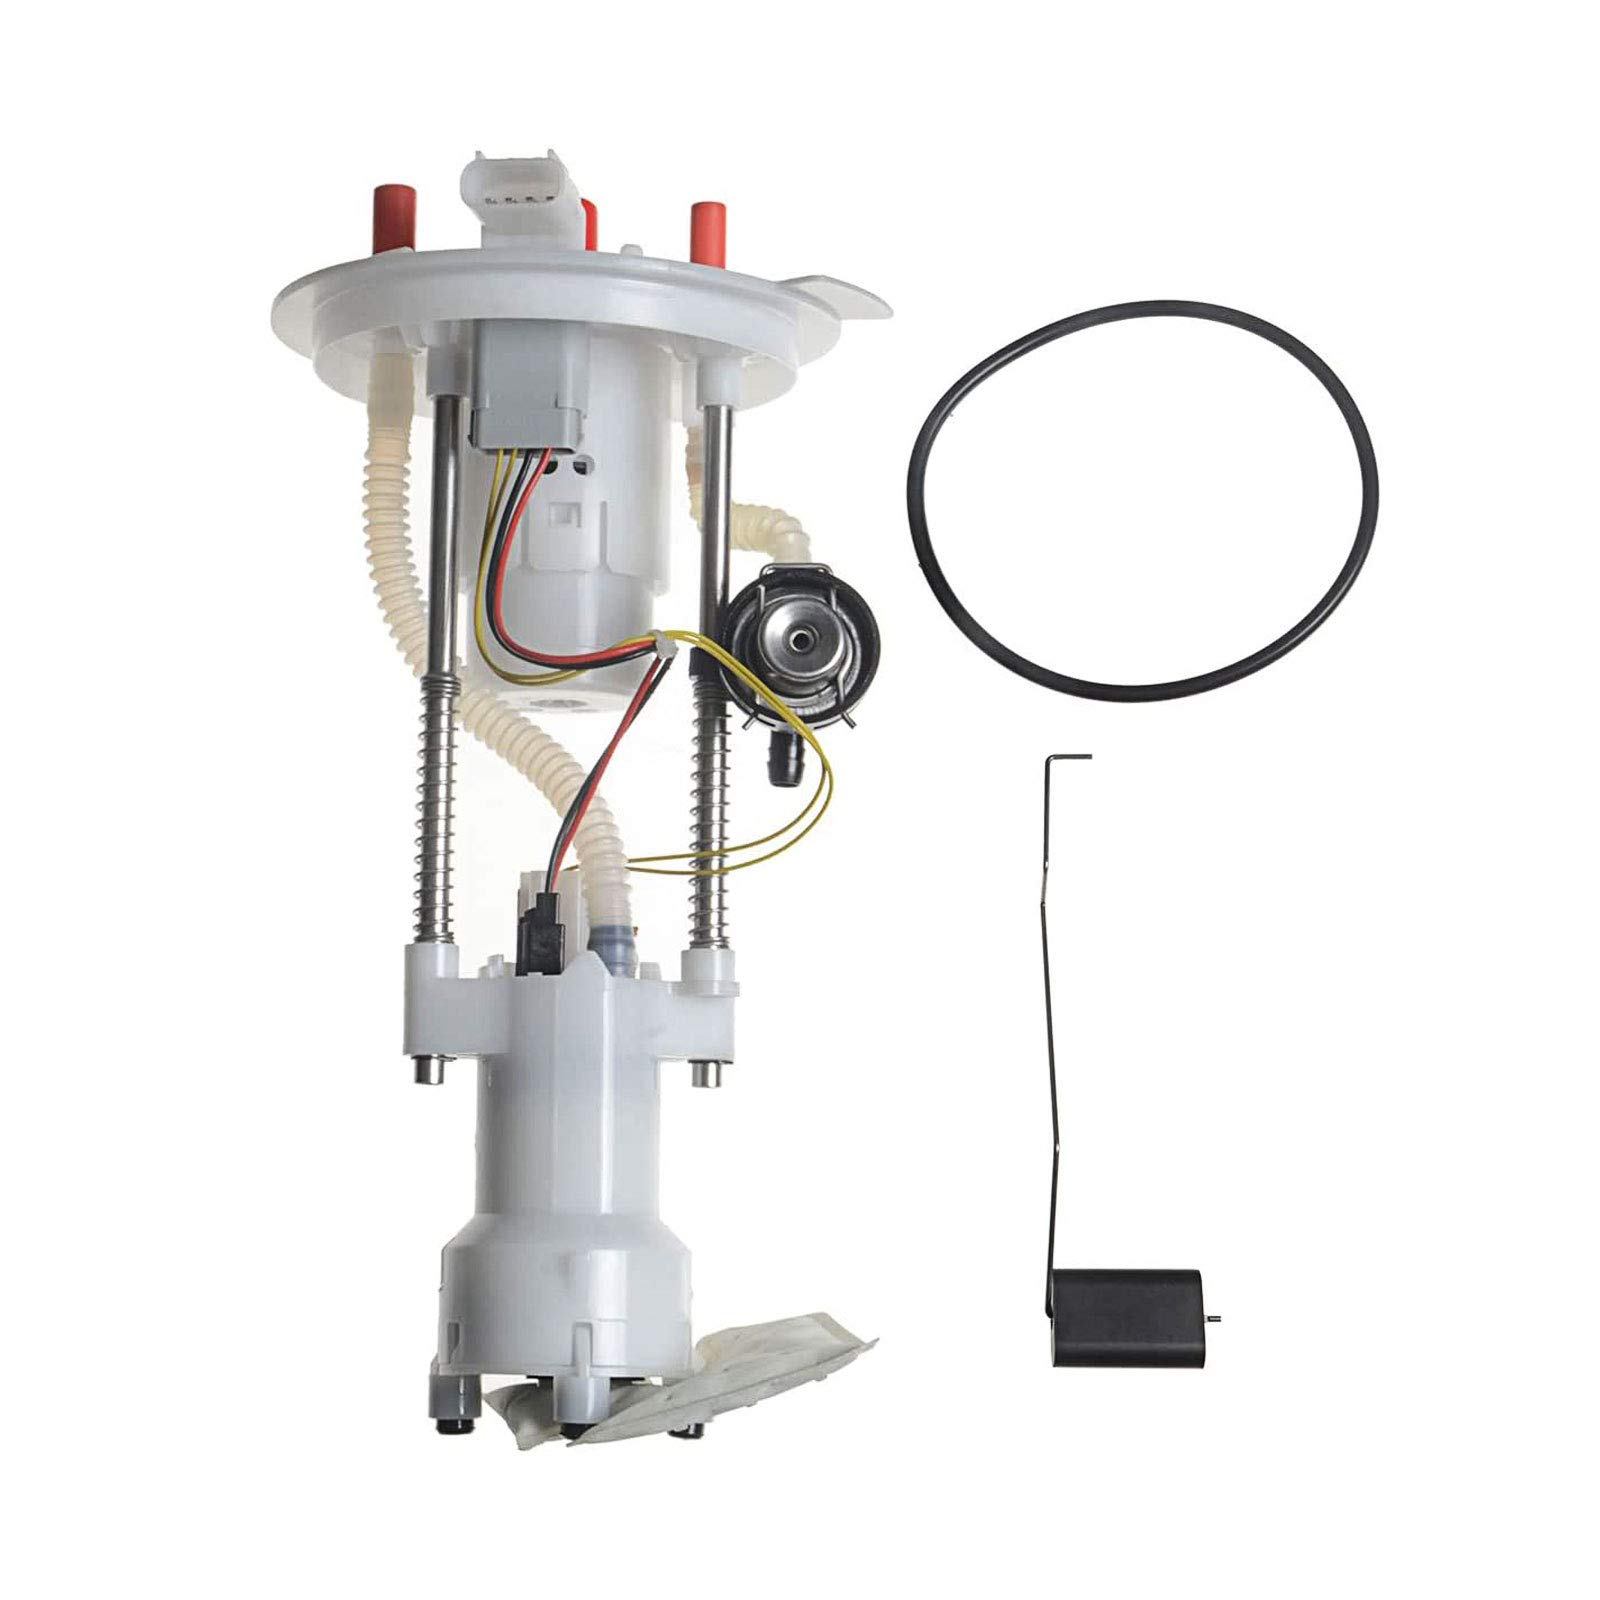 A-Premium Fuel Pump Module Assembly Replacement for Ford Expedition 2005-2008 Lincoln Navigator 2007 2008 V8 5.4L